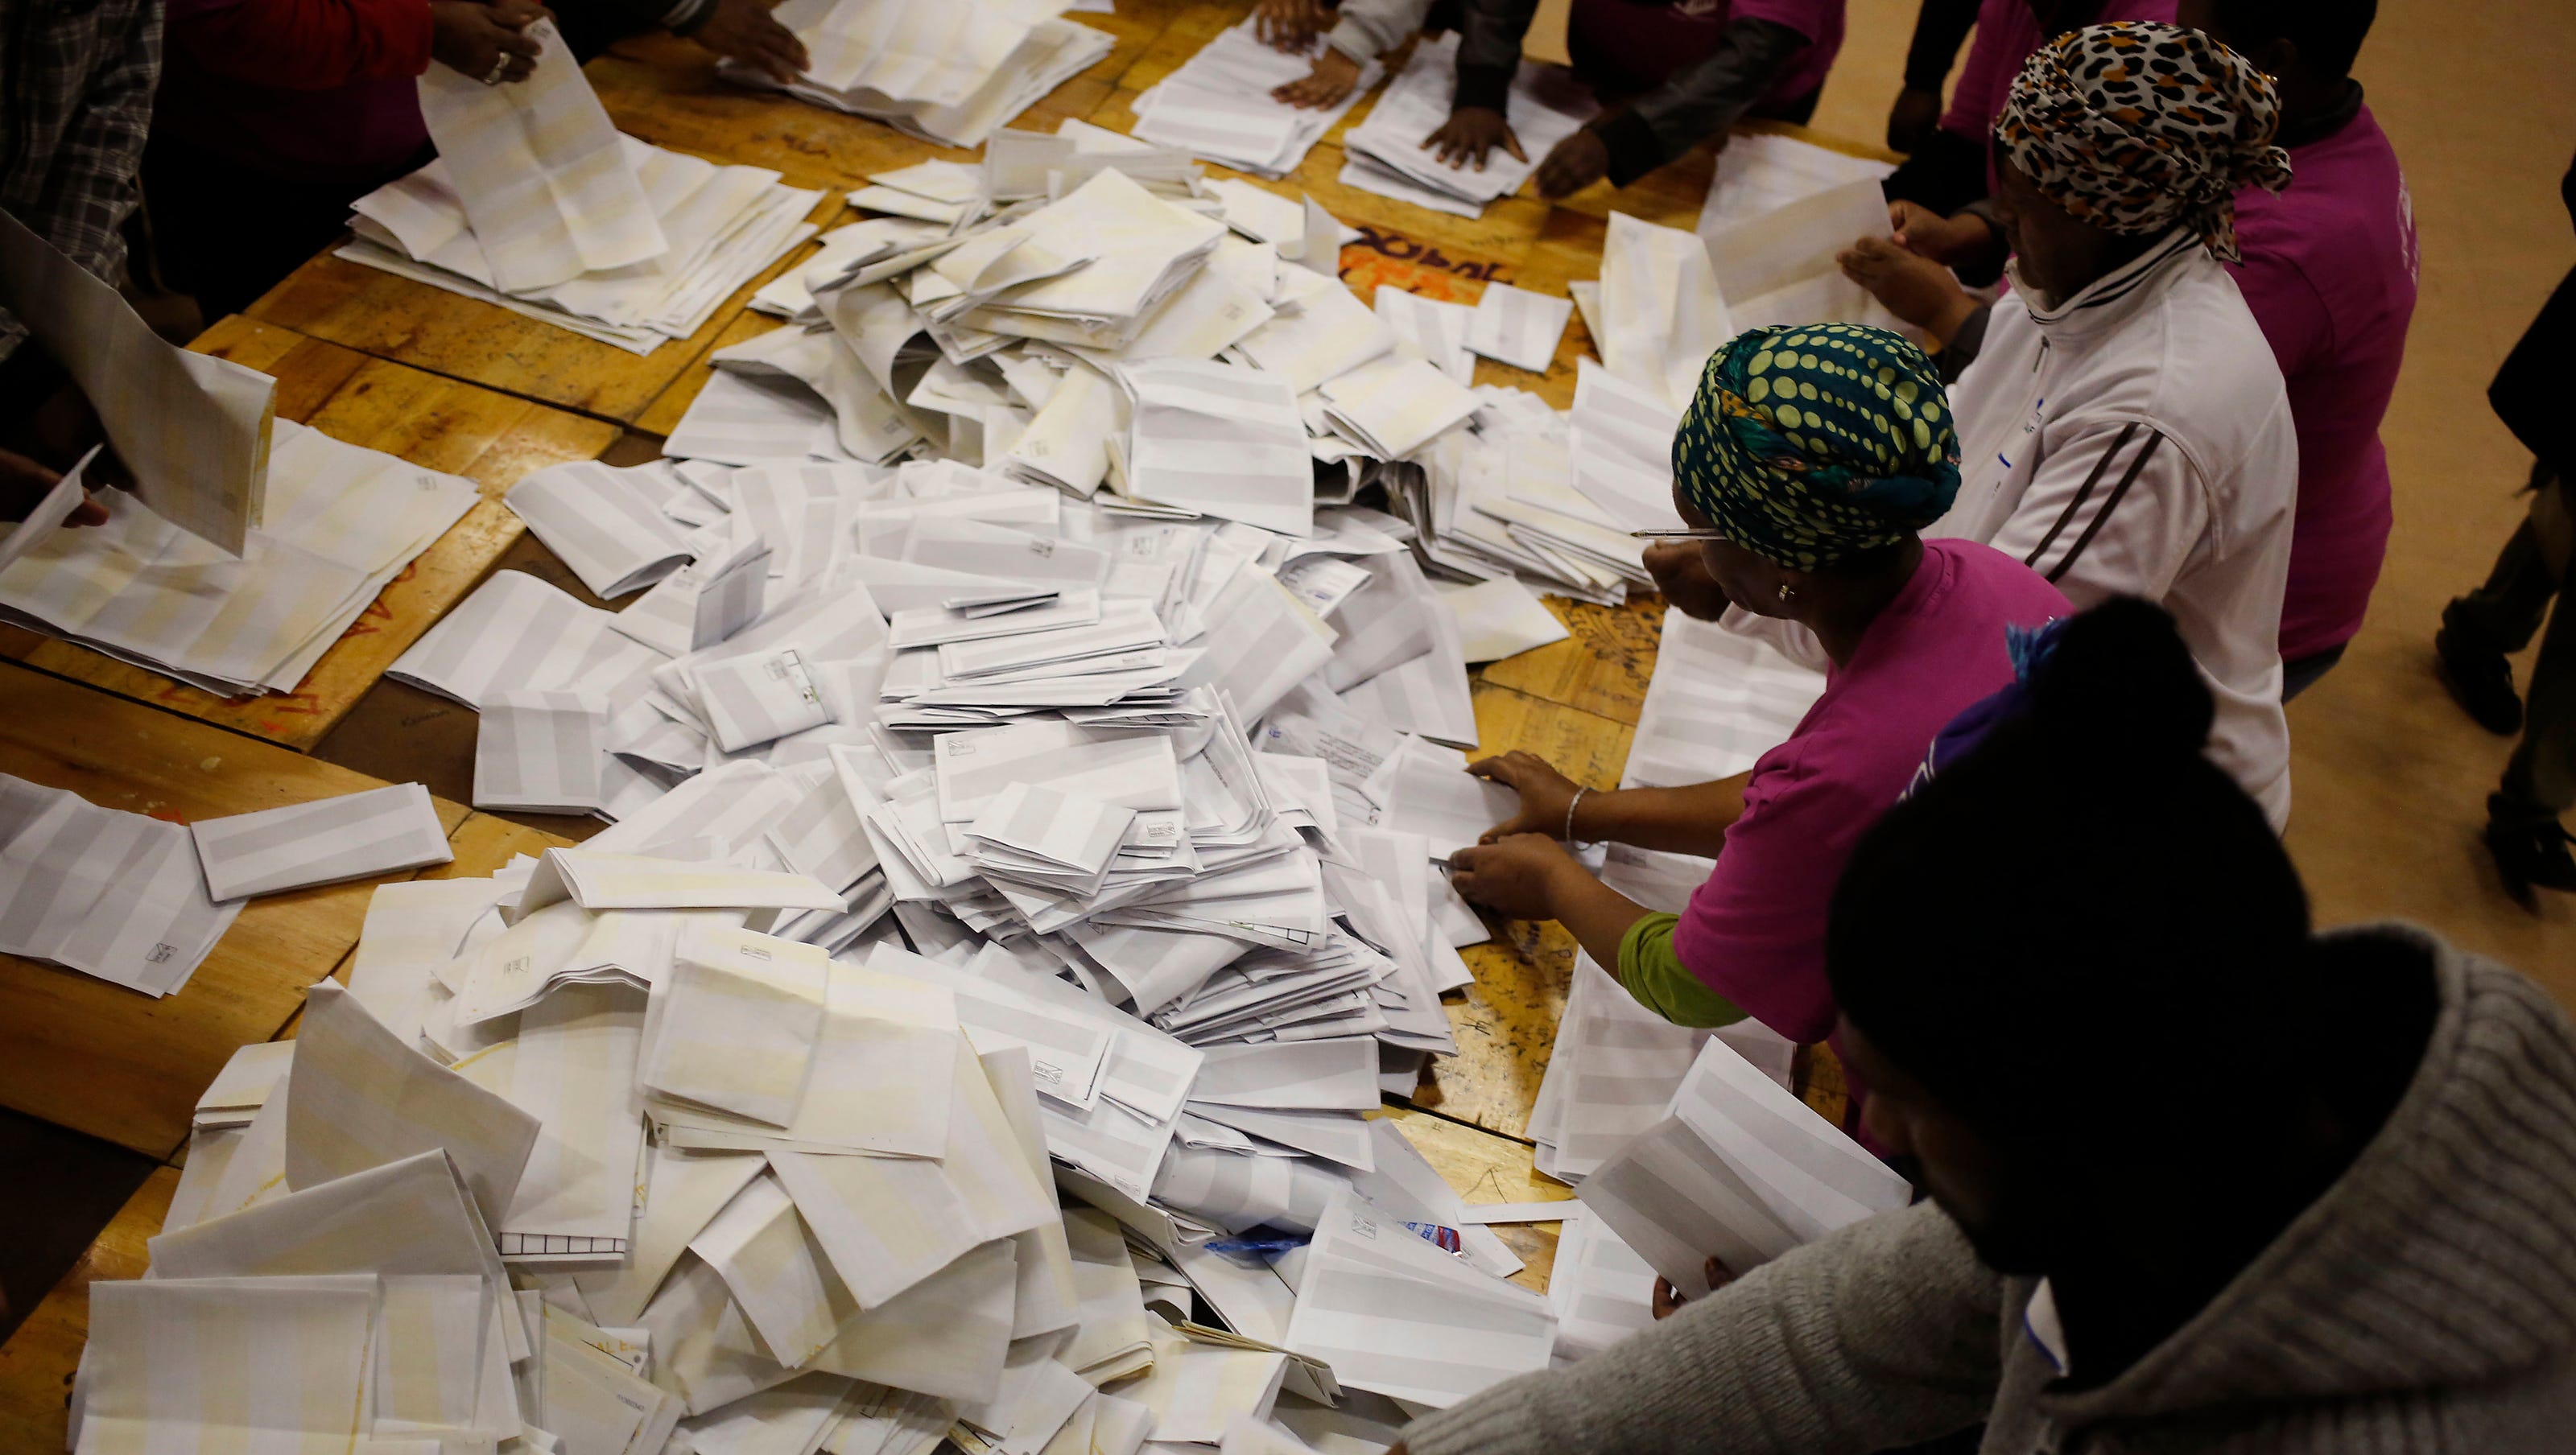 Early Results Show Anc In Lead In Sa Vote